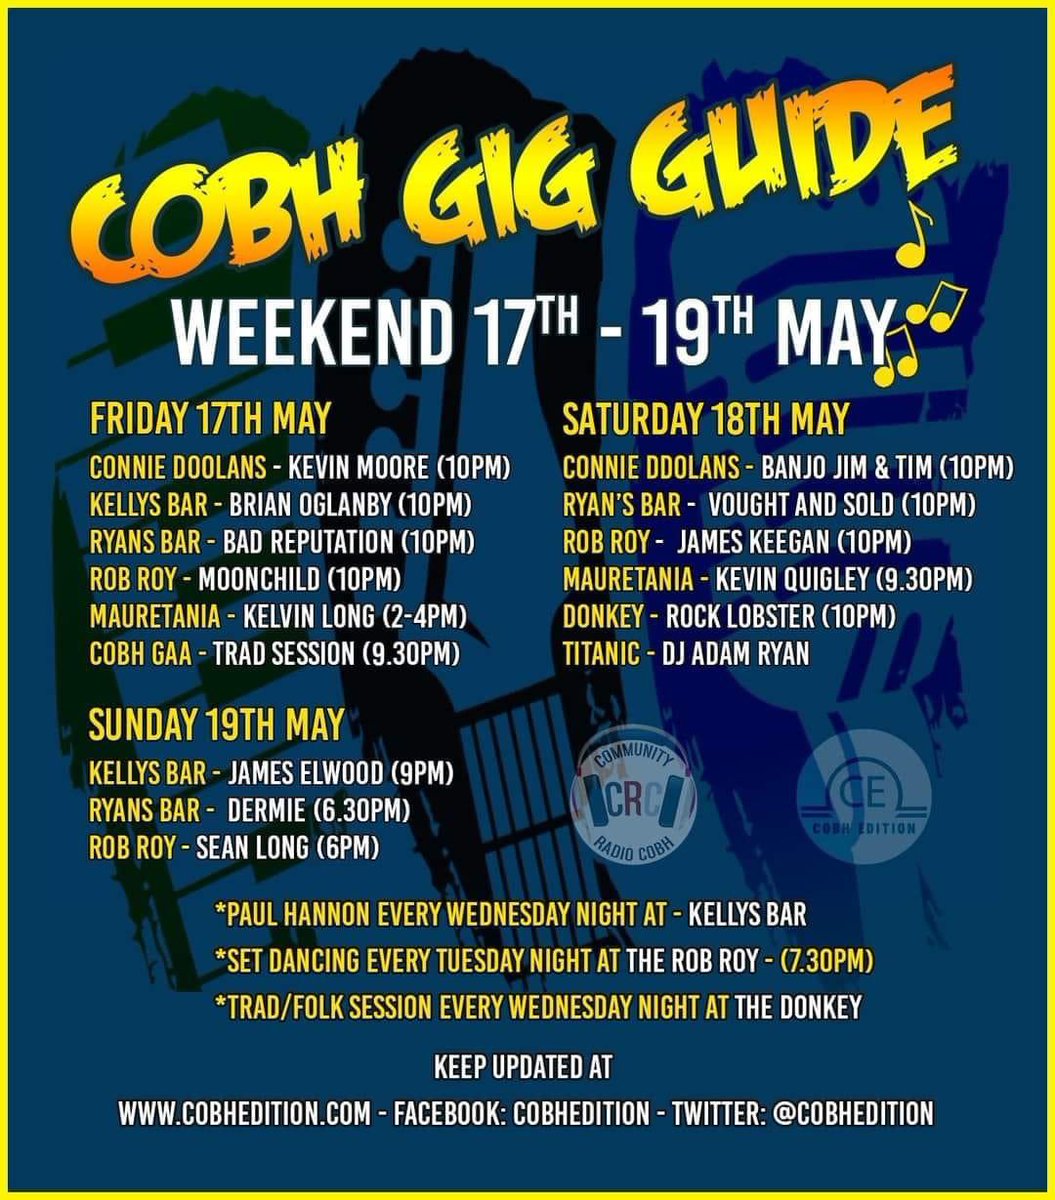 Weekend Gig Guide in #Cobh thanks to 🎸@CobhEdition 

#CobhRocks #SeeYouInCobh #GigGuide